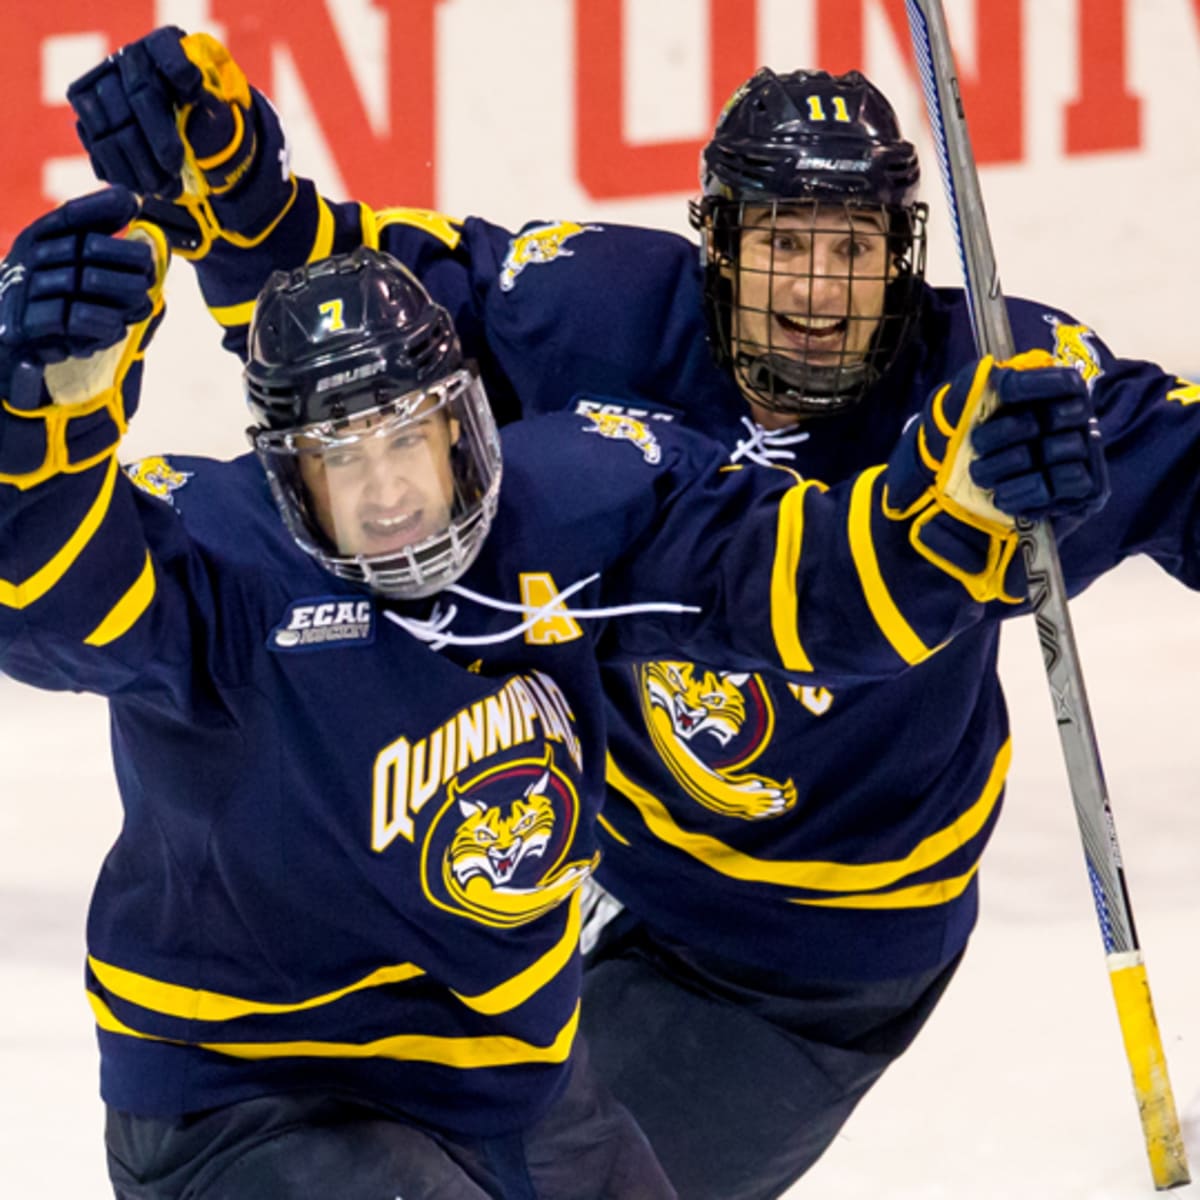 Watch NCAA hockey tournament online Game time, live stream, TV